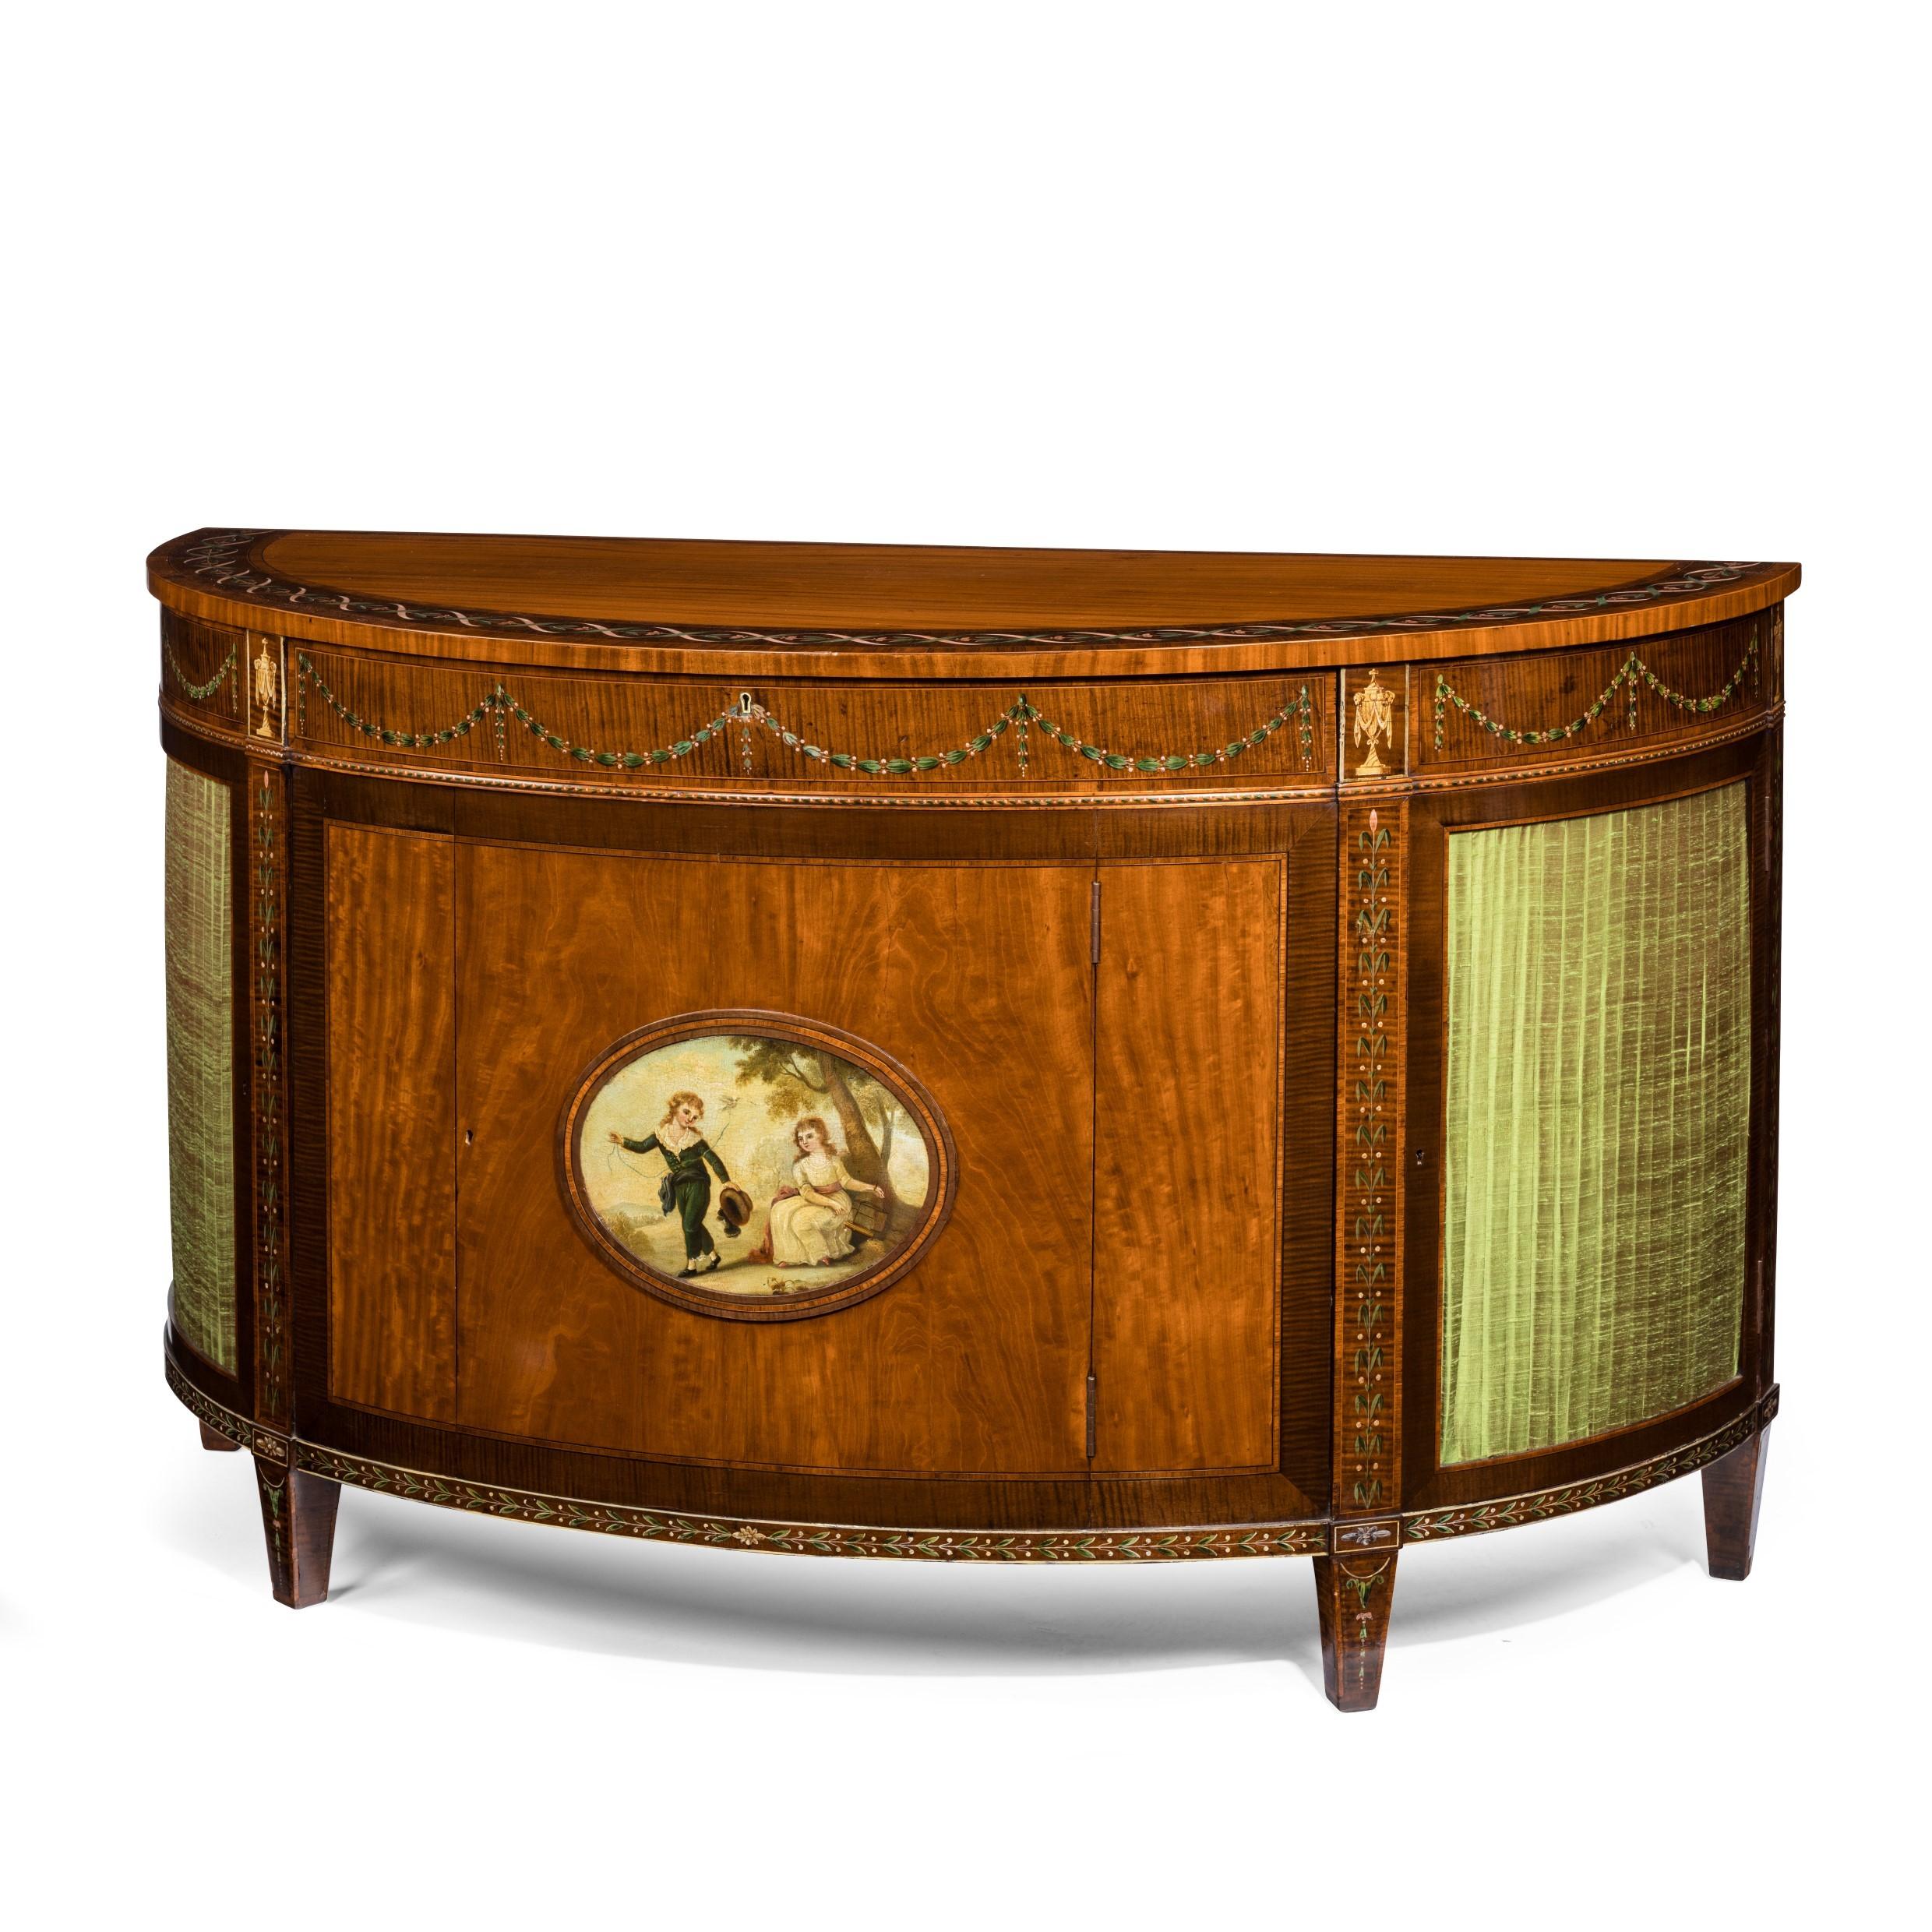 Victorian satinwood demi-lune commode in the Sheraton revival taste, with a central door showing a painted romantic scene between two panels of pleated silk, decorated throughout with delicate bands of flowers and bellflower swags in stained